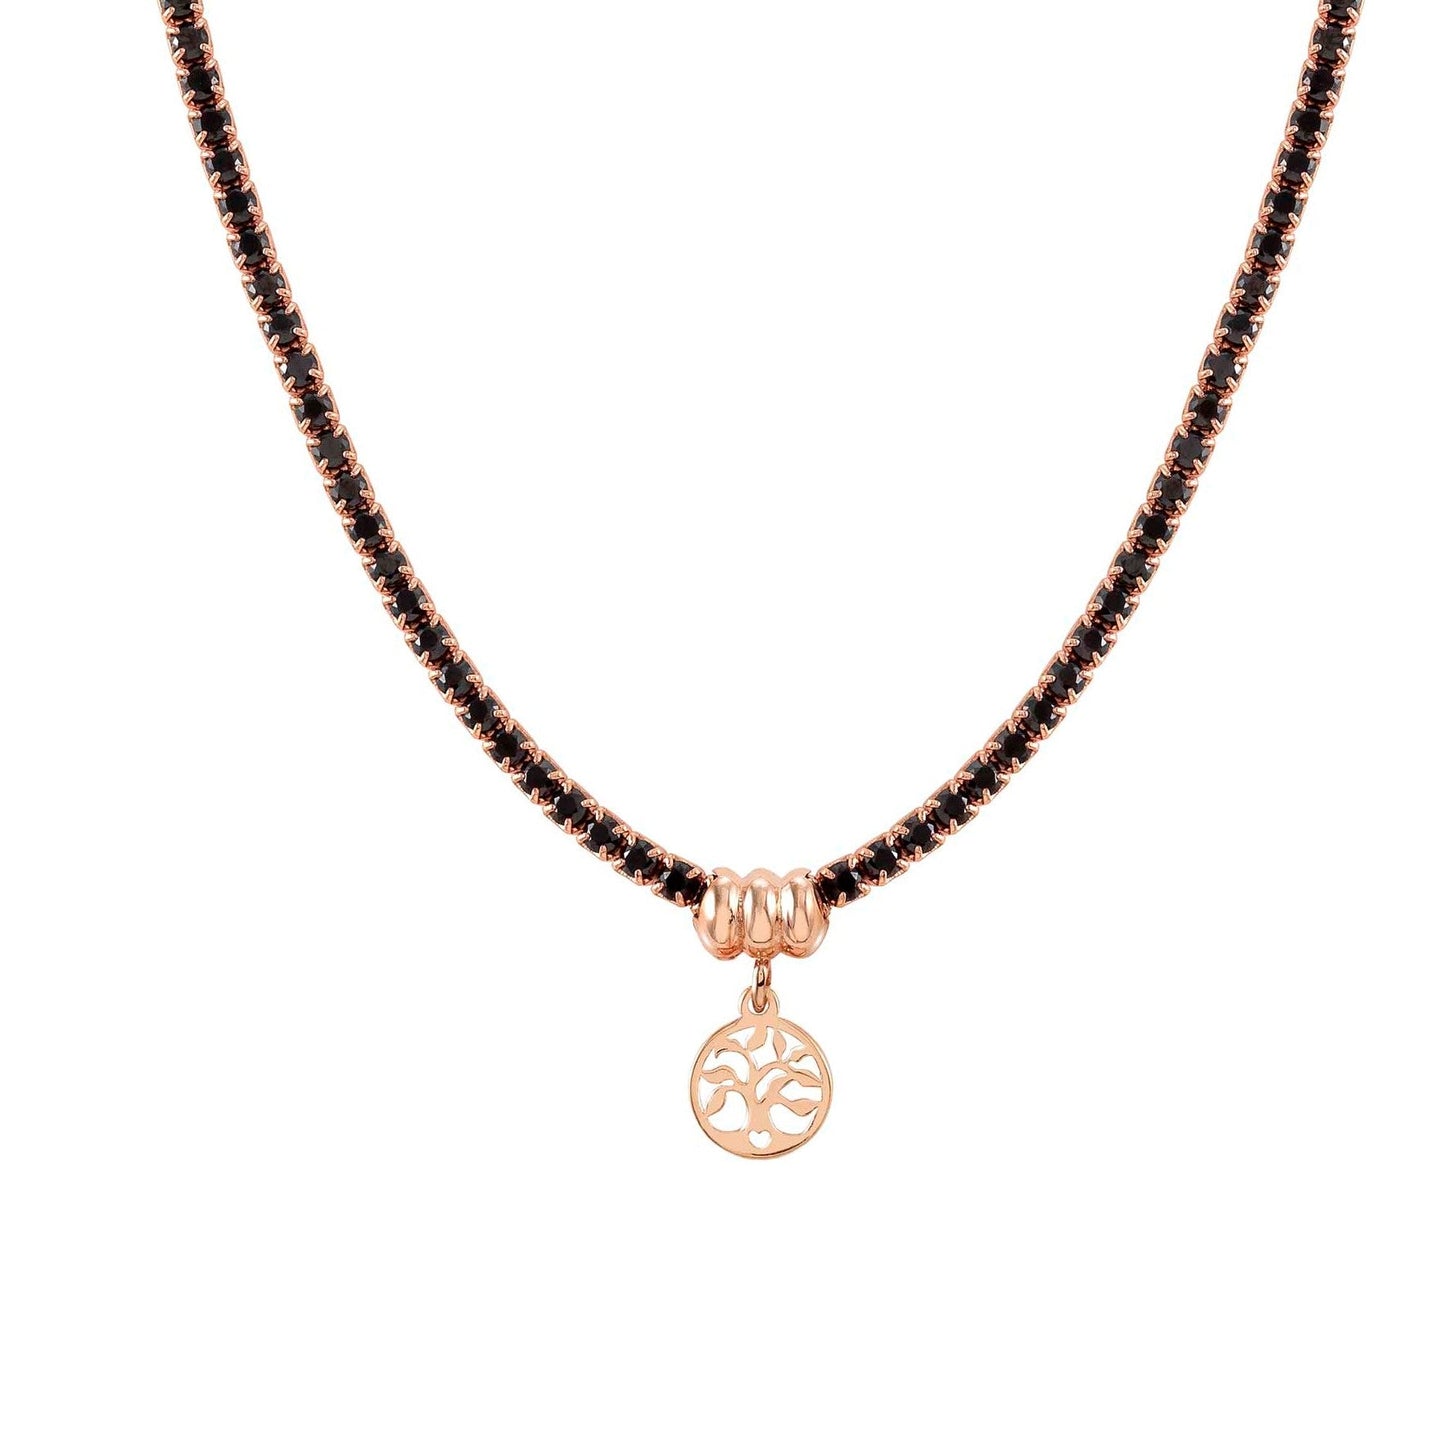 Nomination Chic & Charm Necklace with CZ Rose Tree of Life in Rose Gold Tone